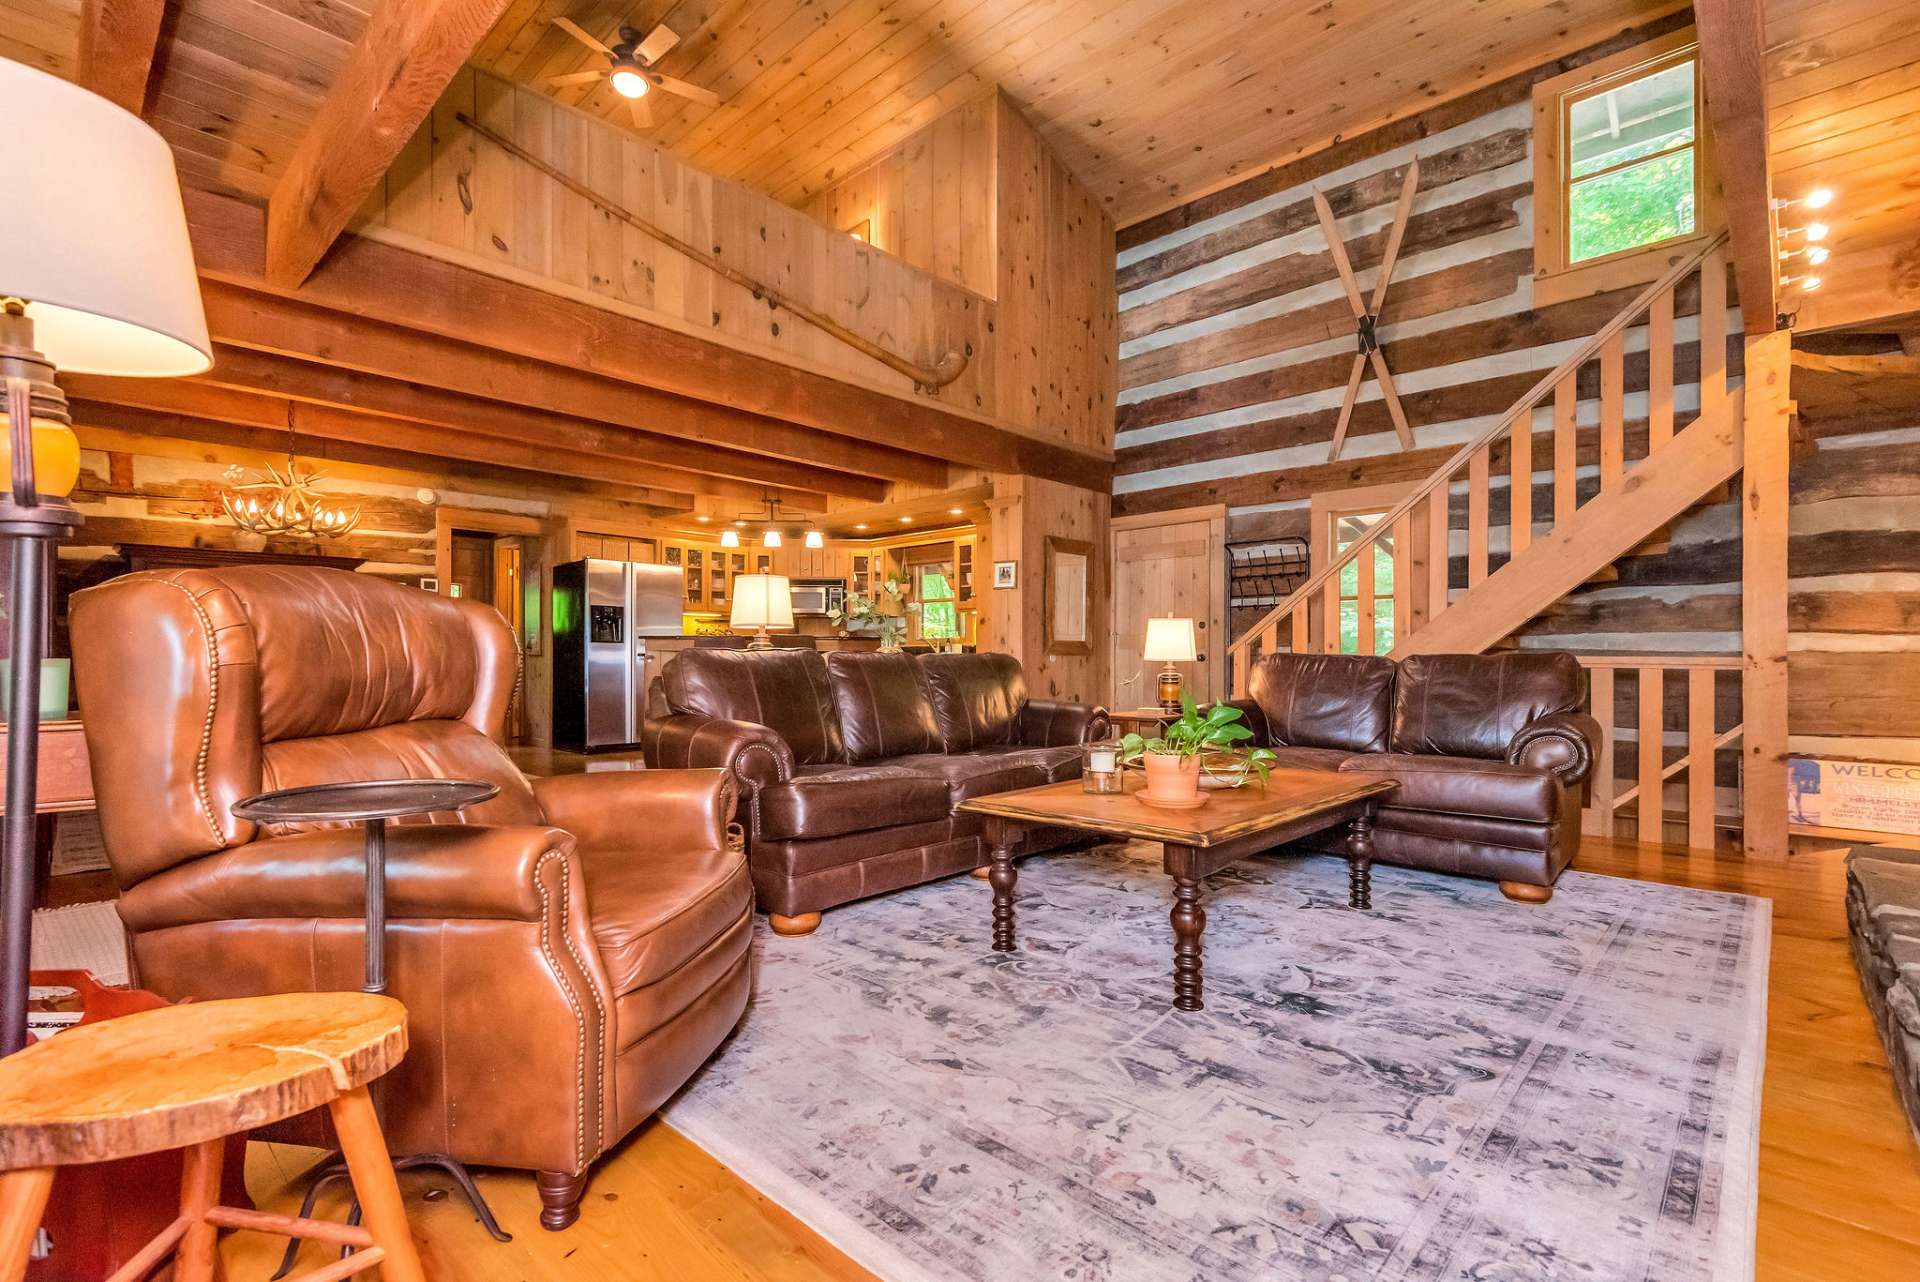 Open concept makes being together in the mountains effortless!